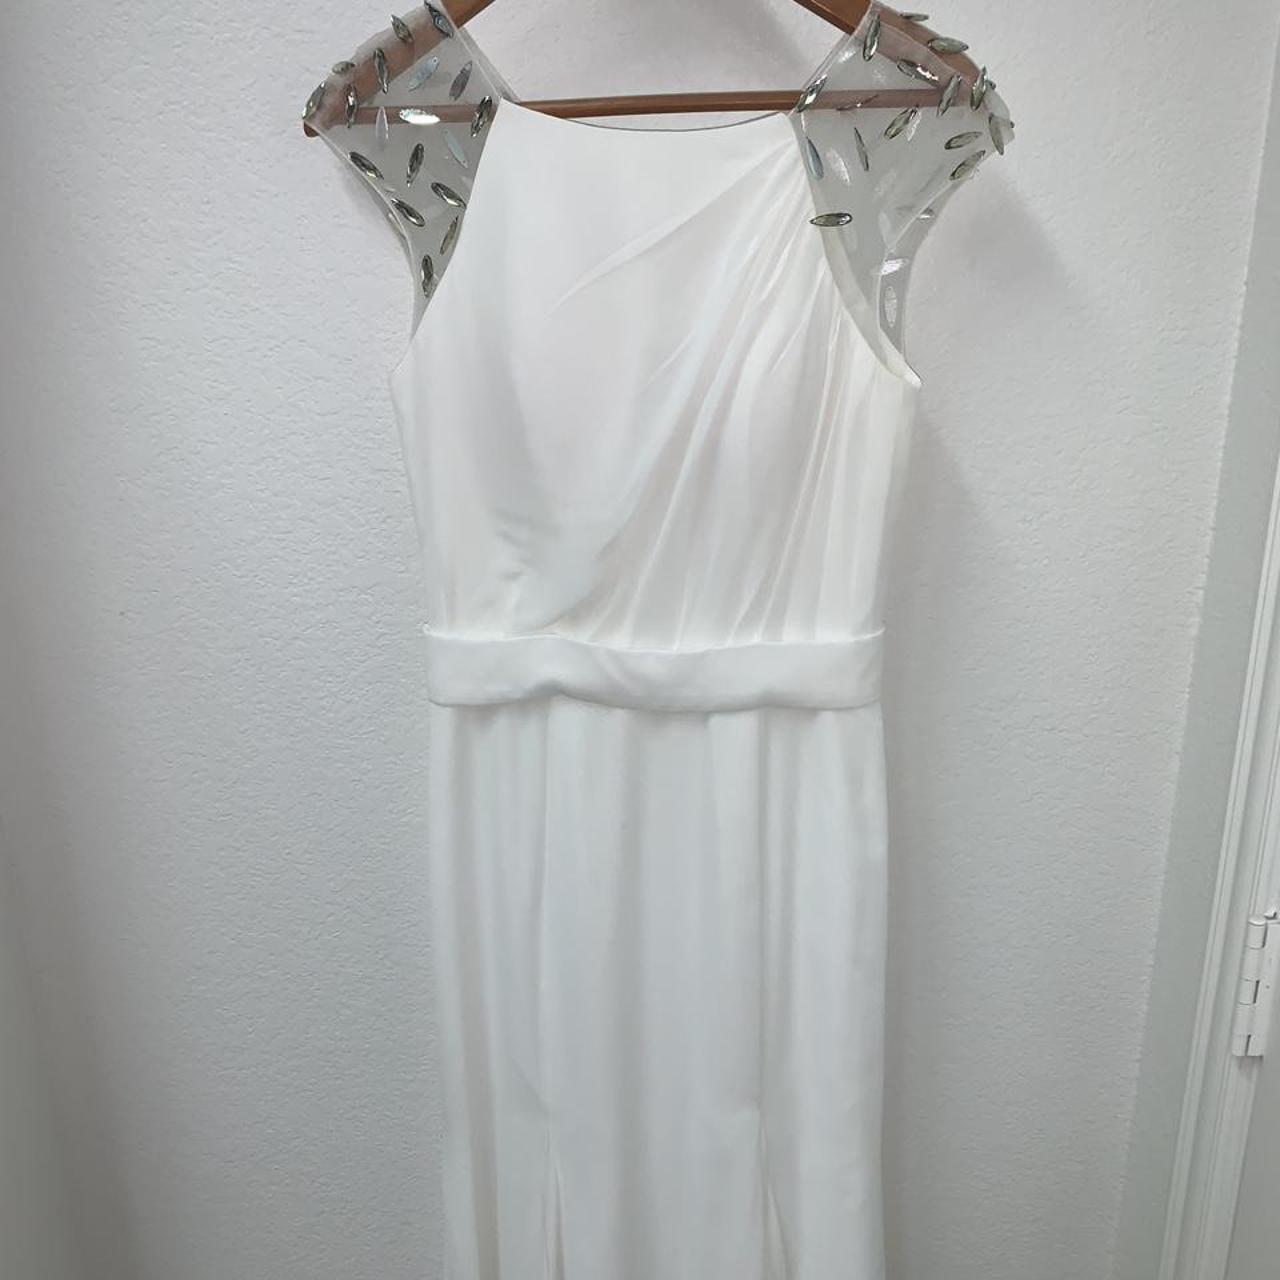 Women's White and Silver Dress (2)